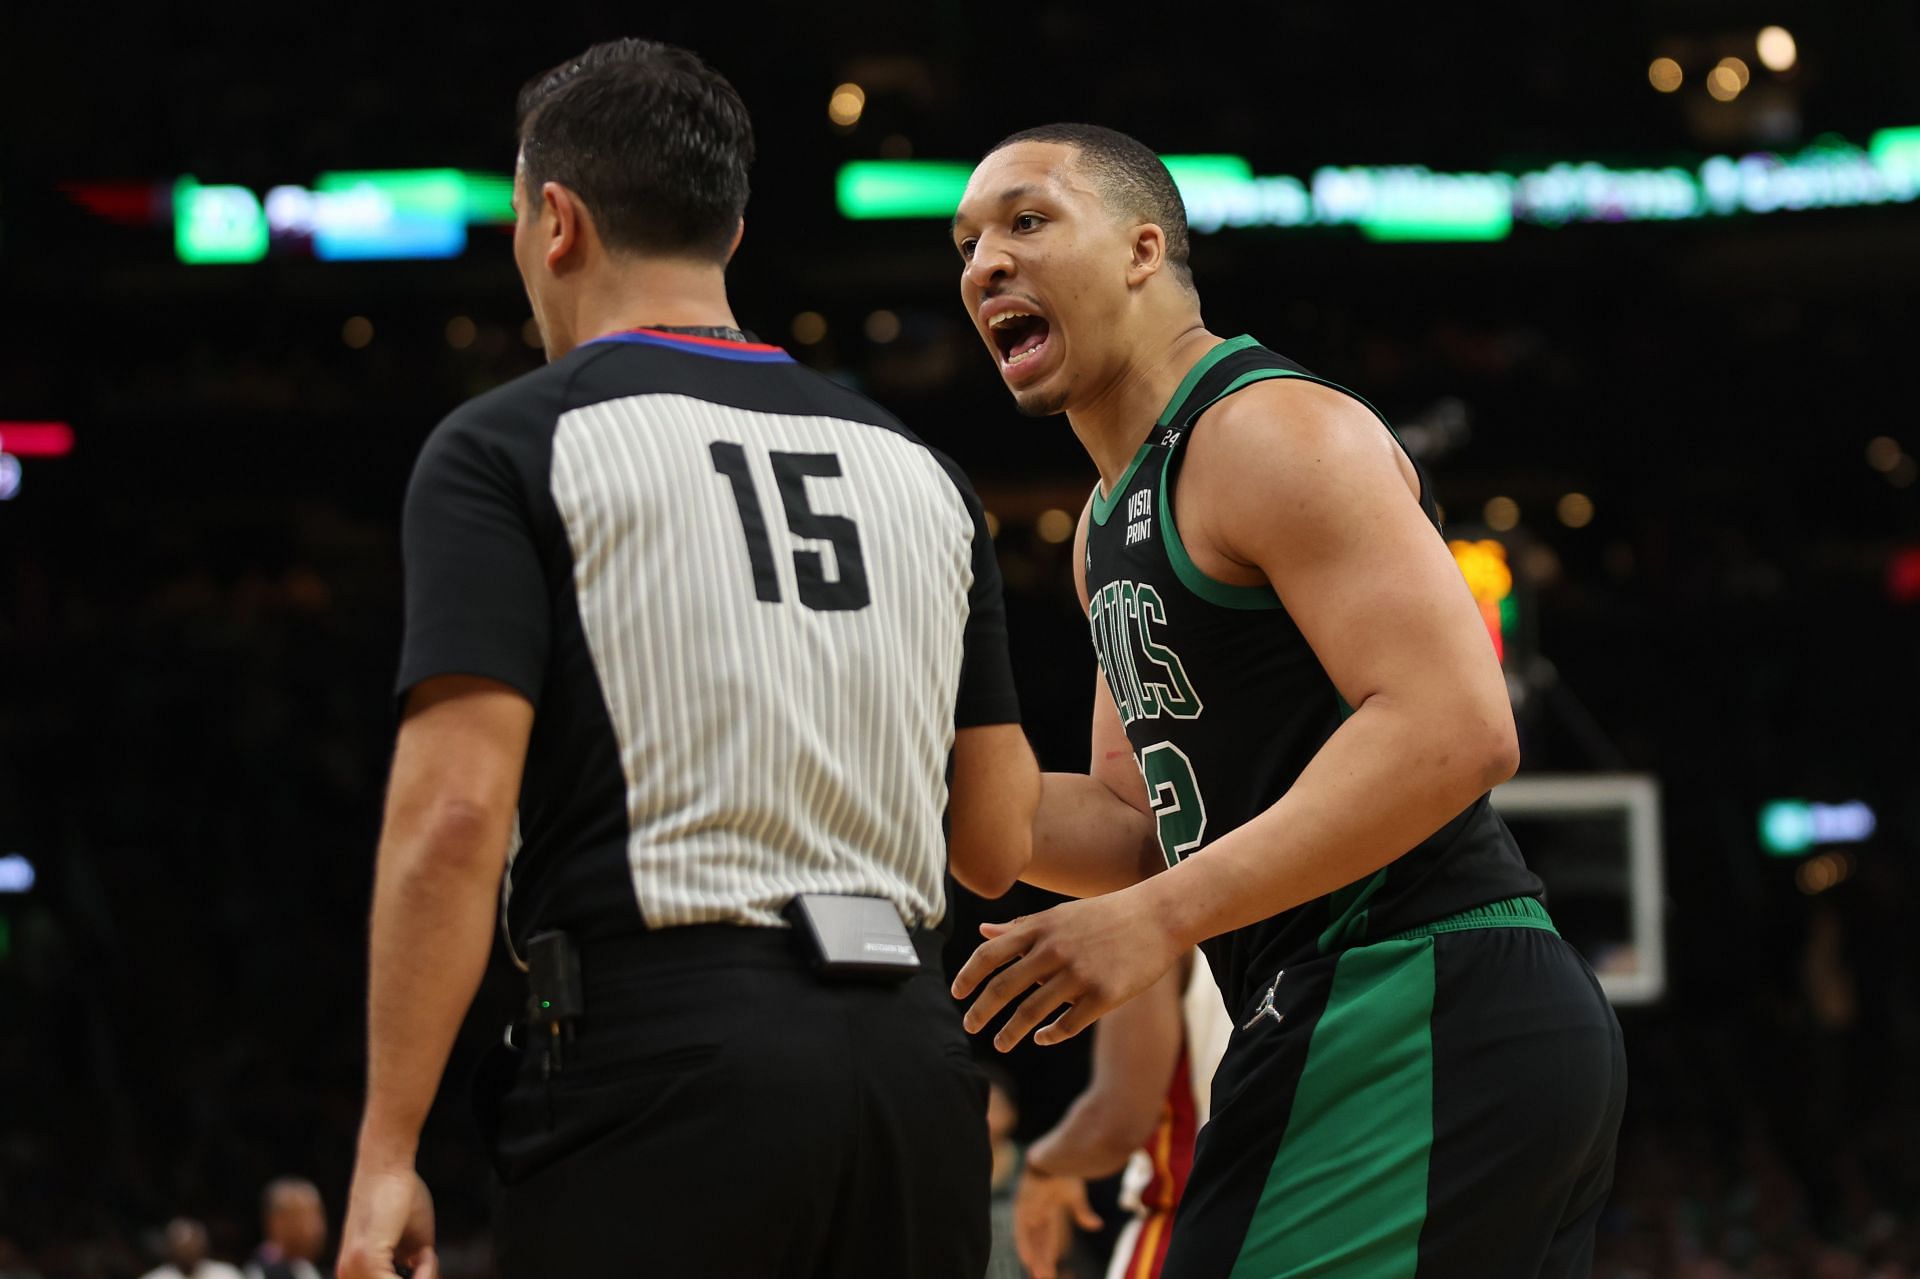 The NBA insiders did not love the way Grant Williams complained to the refs.